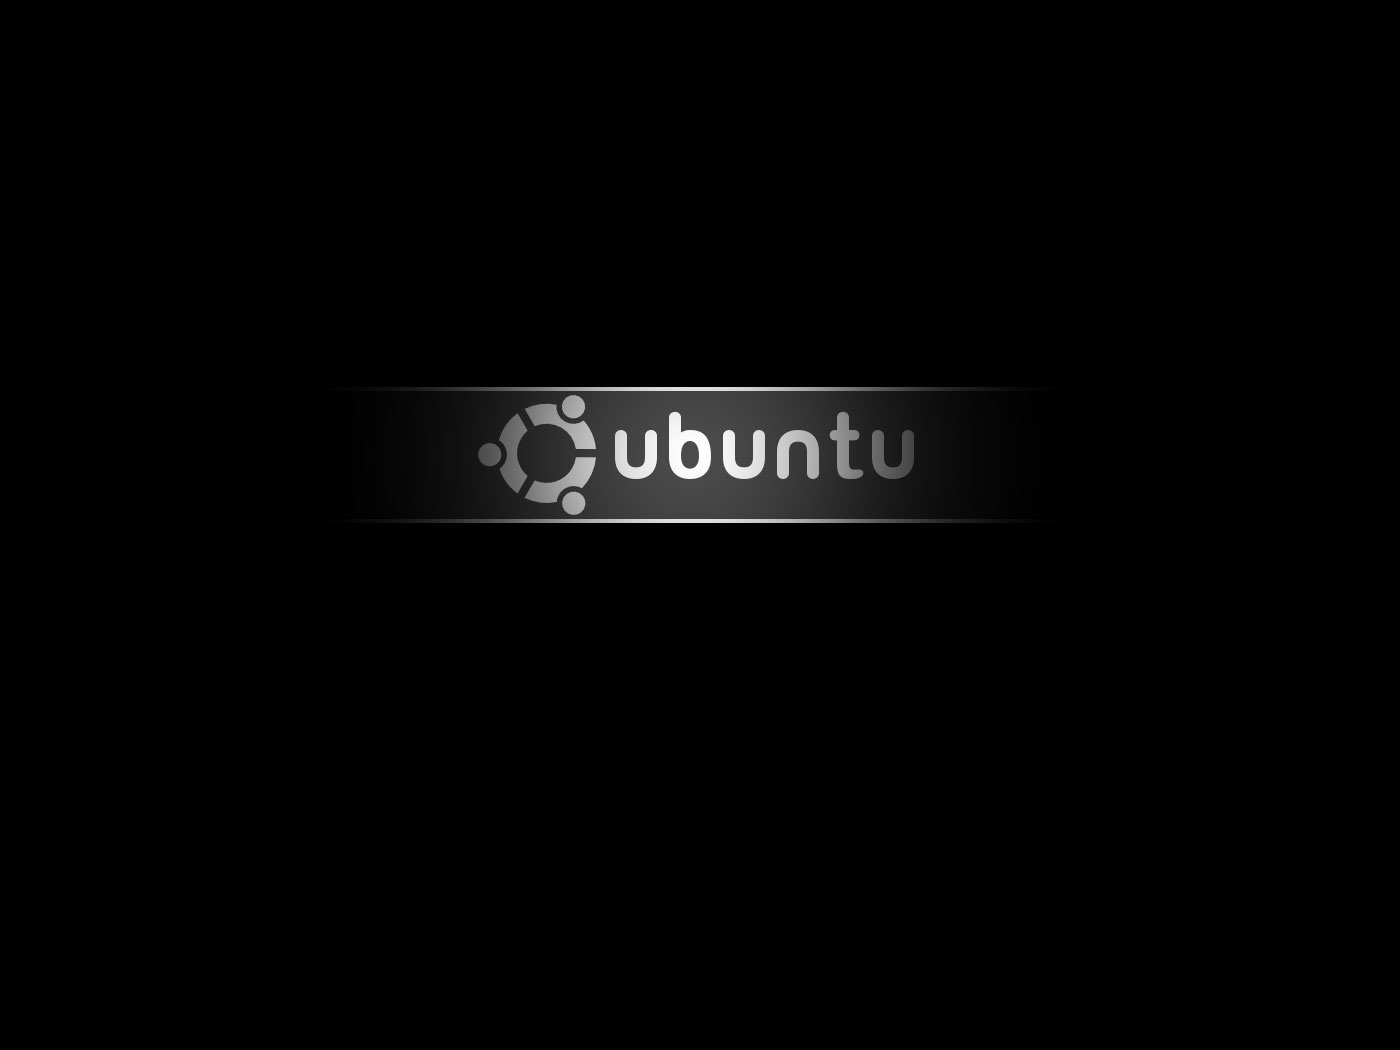 Wallpaper You Are Ing The Linux Named Black Ubuntu It